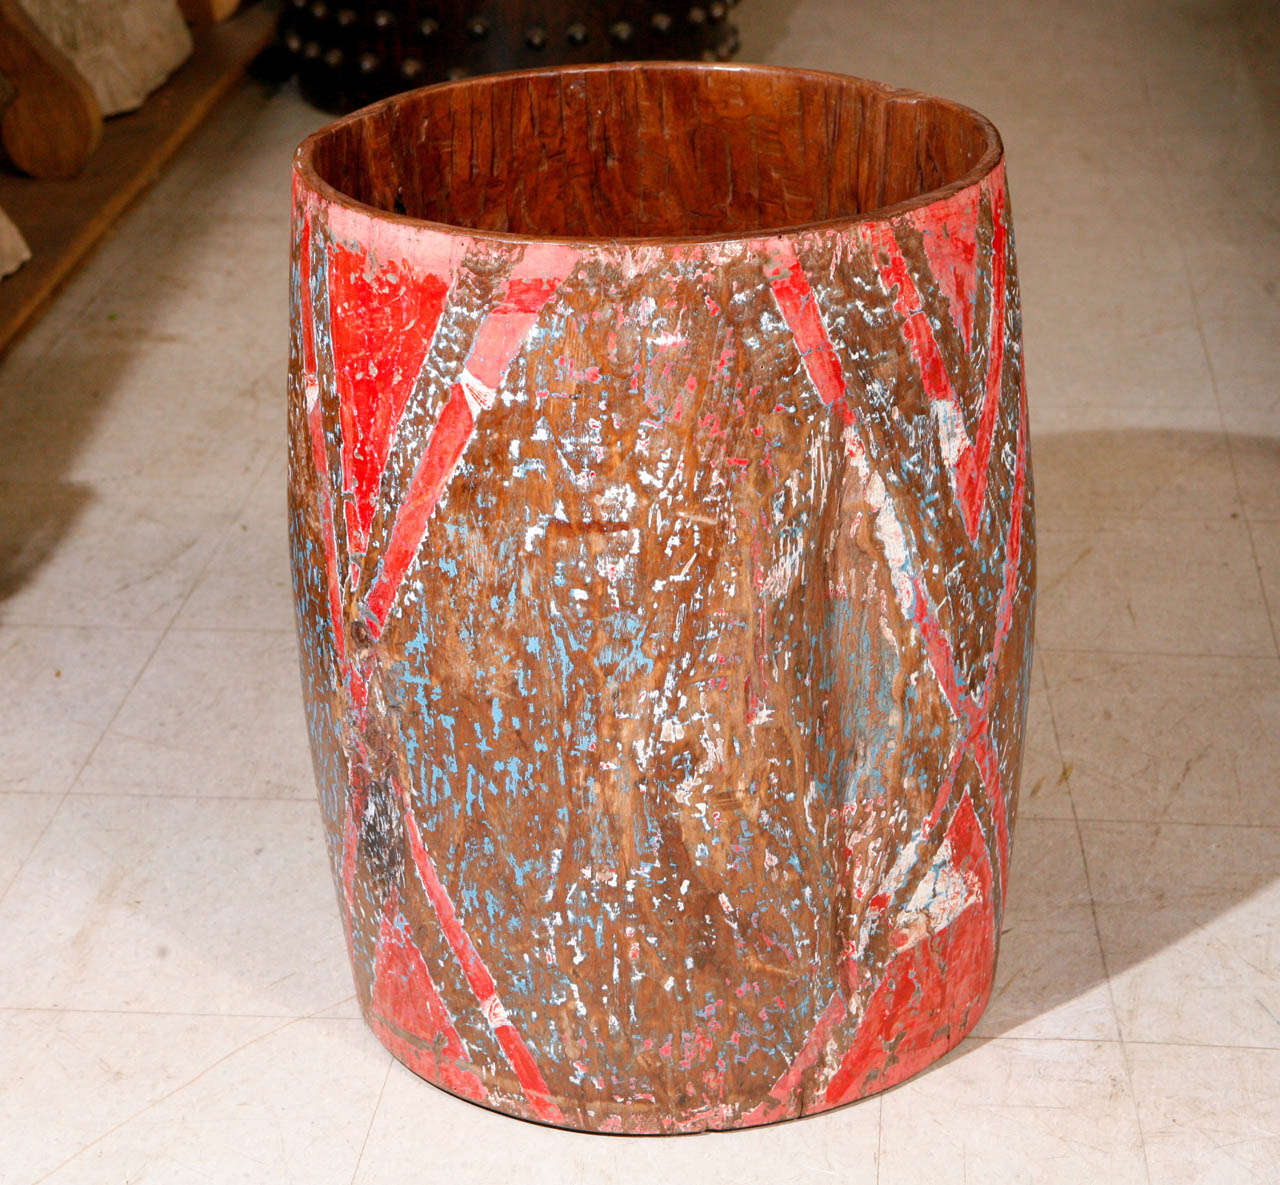 Antique drum vessel, original vibrant colors, red white and blue with geometric motifs, teak hardwood, rural Java, Early 1900s.